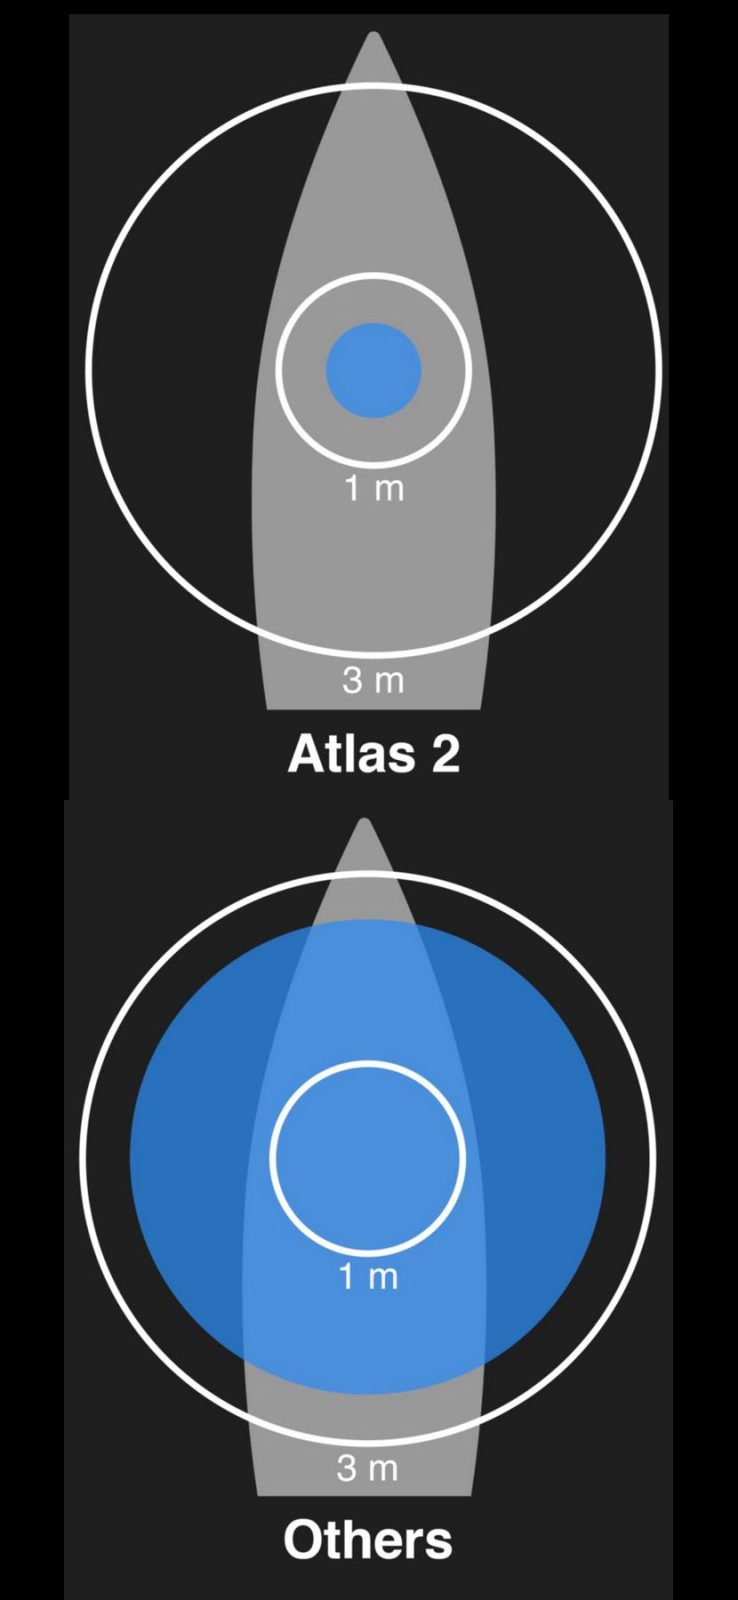 Atlas 2 claimed accuracy versus other sailing instruments